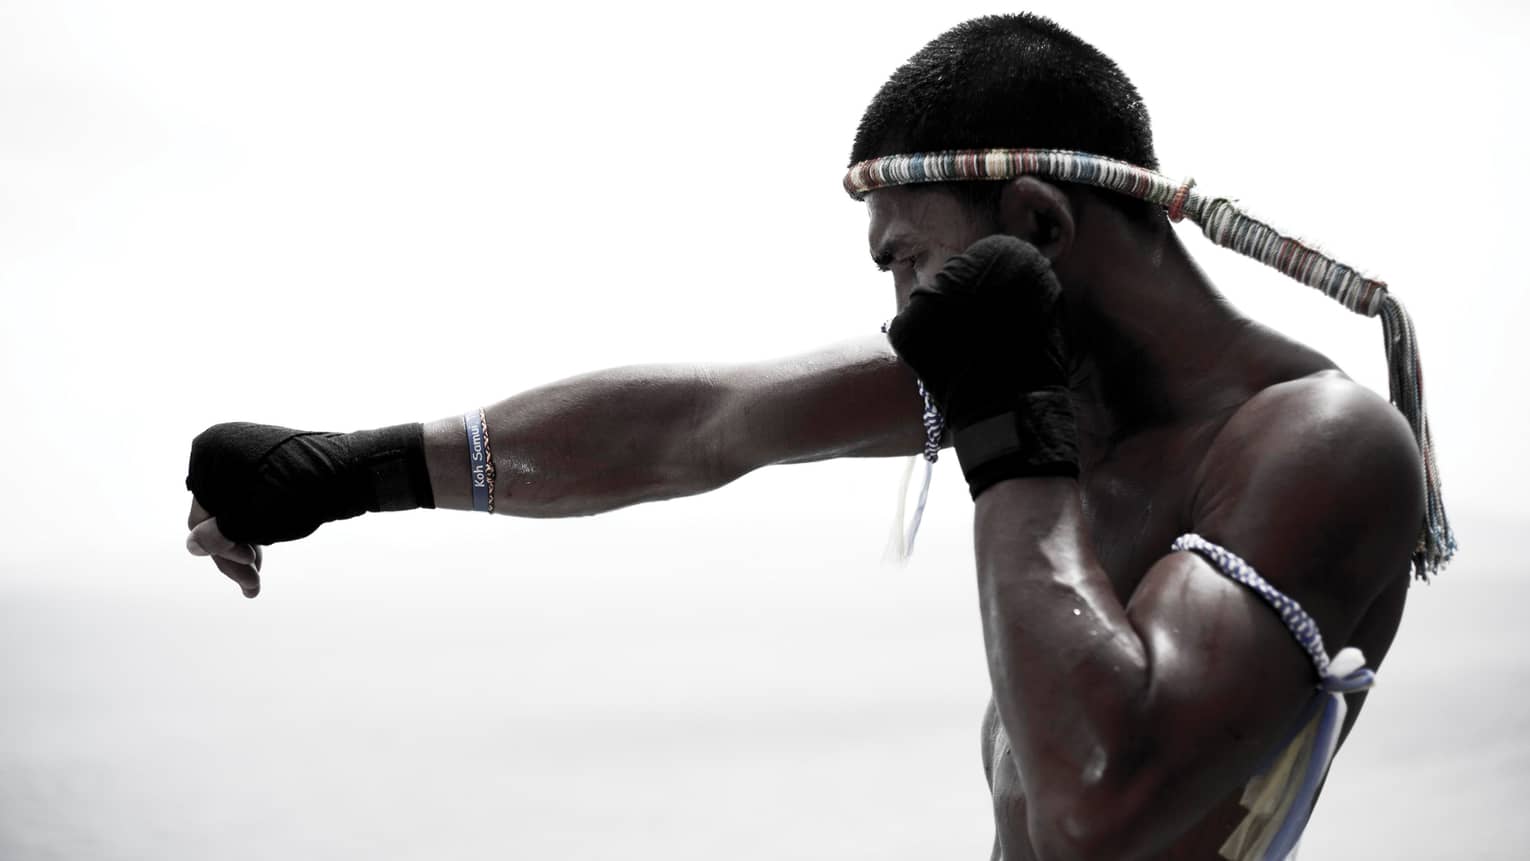 Muay Thai boxer punching, silhouetted by a white-grey background